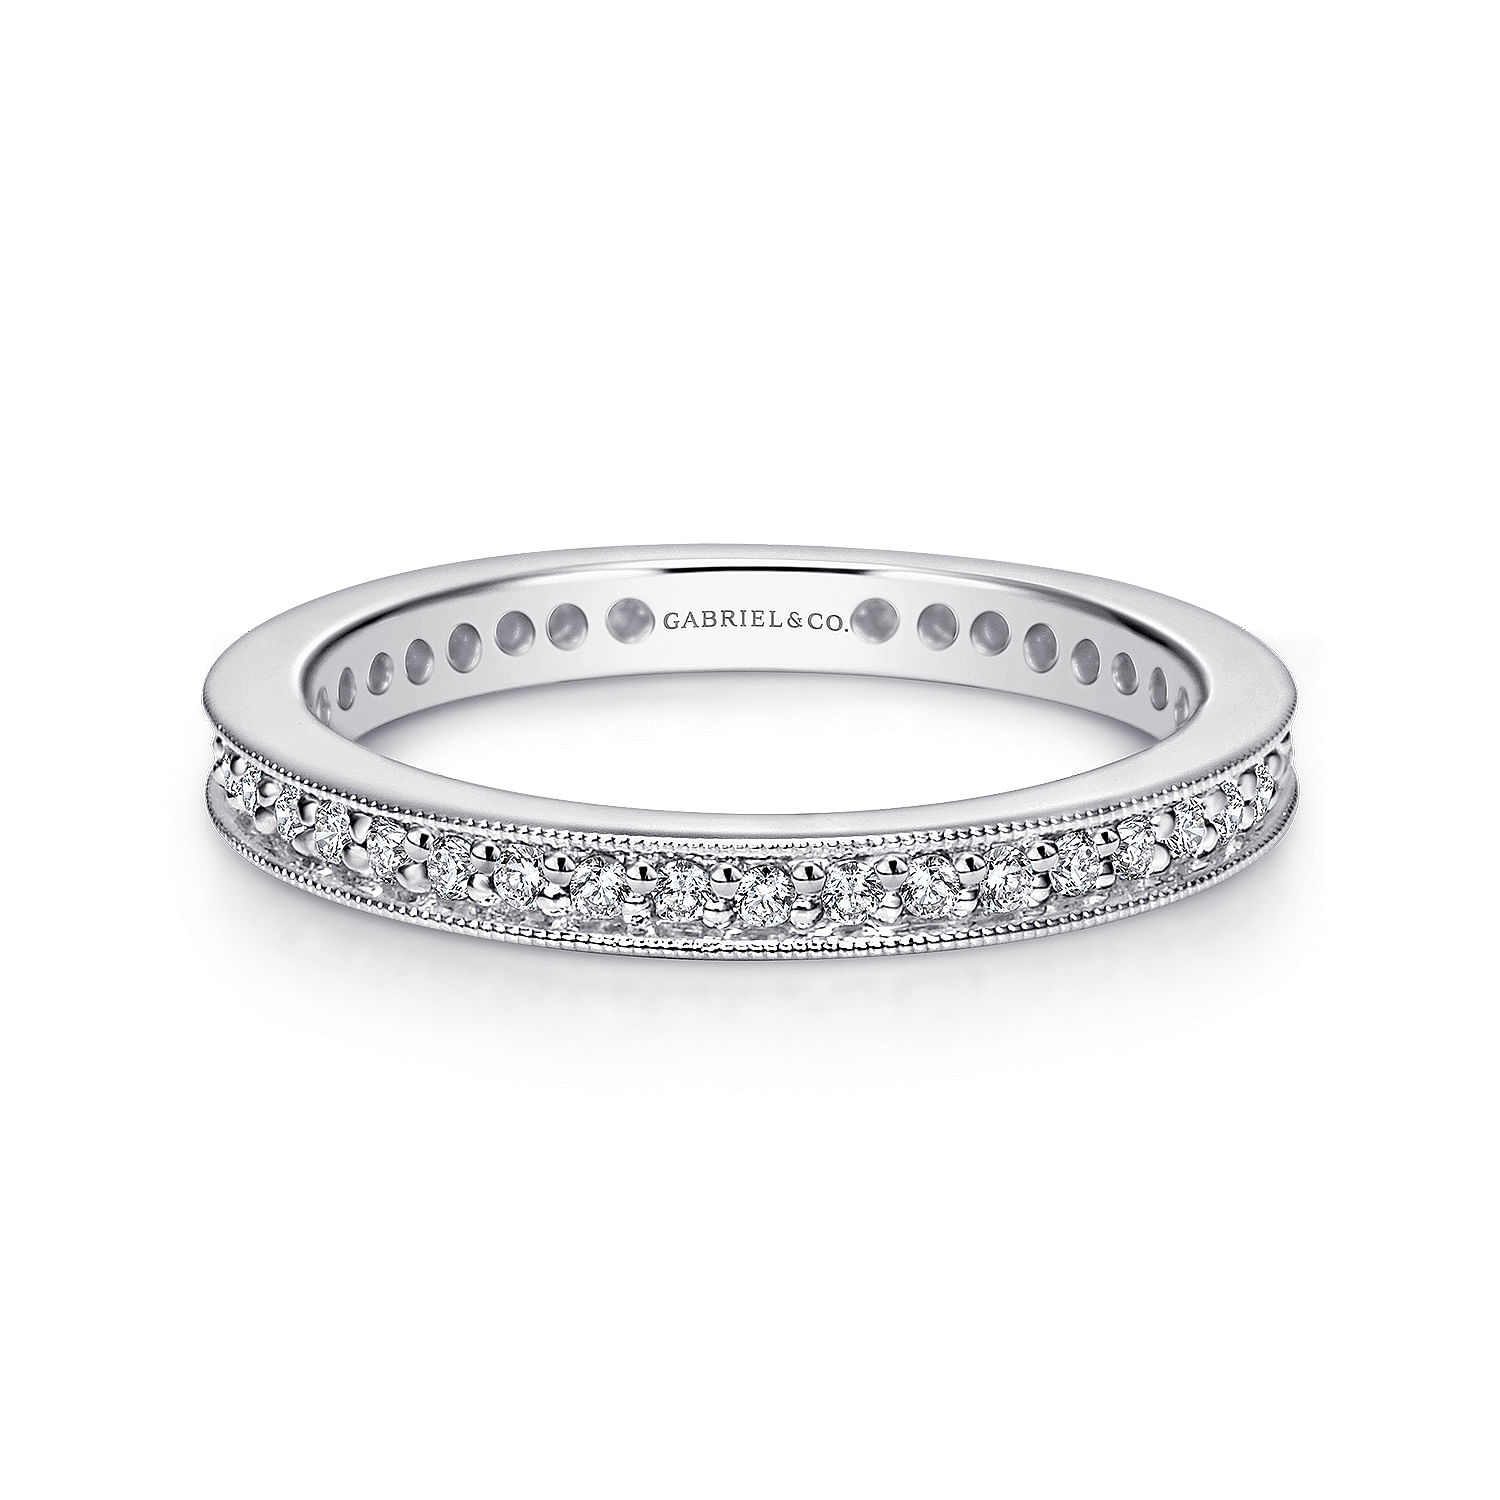 Gabriel - 14K White Gold Channel Prong Diamond Eternity Band with Milgrain